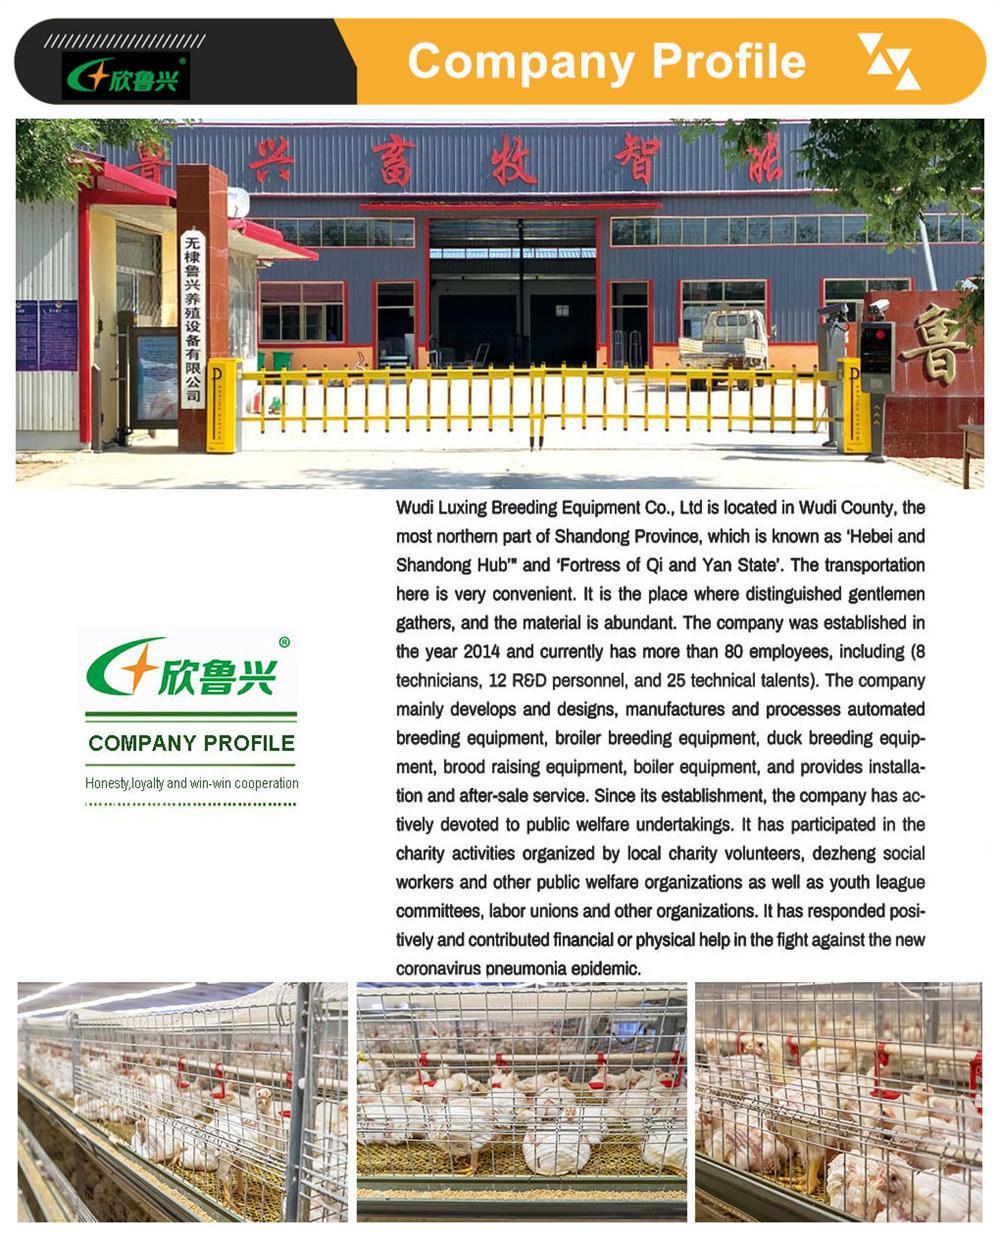 Automatic Poultry Farming Equipment Modernized Cage Layer Chicken Cage